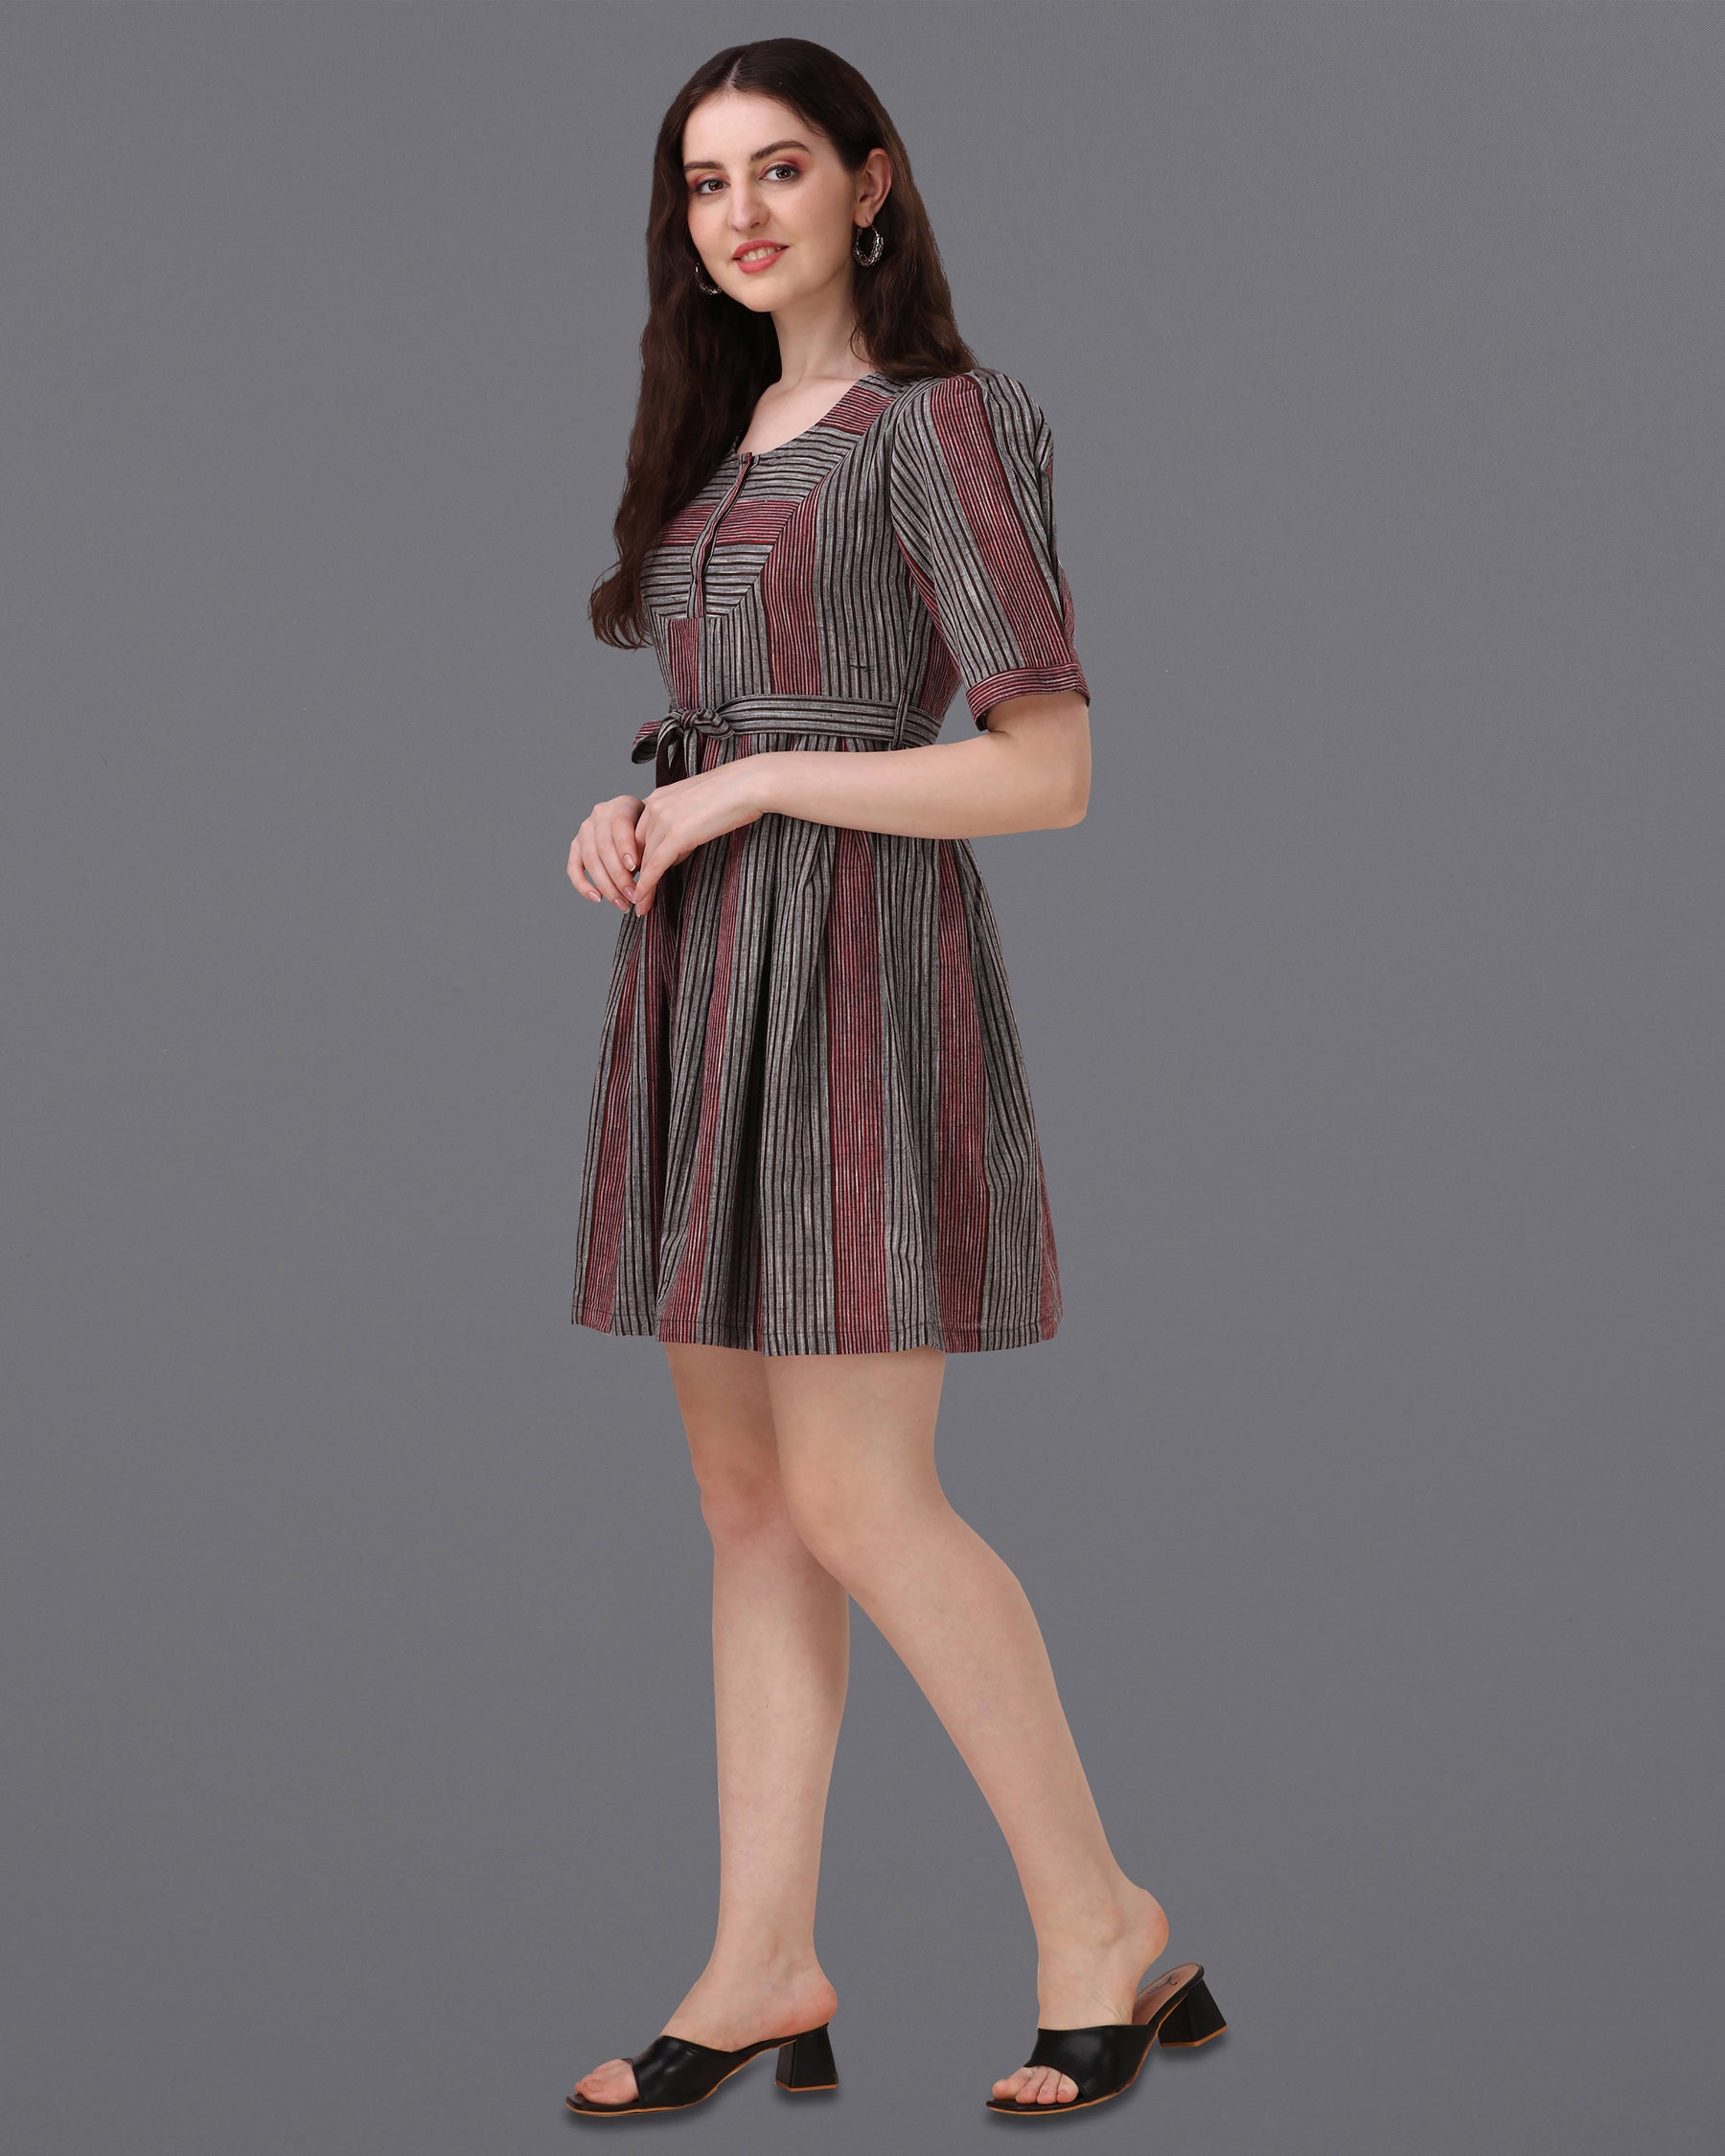 Granite Gray with Moccaccino Red Super Soft Premium Cotton Thigh Length Dress WD035-32, WD035-34, WD035-36, WD035-38, WD035-40, WD035-42